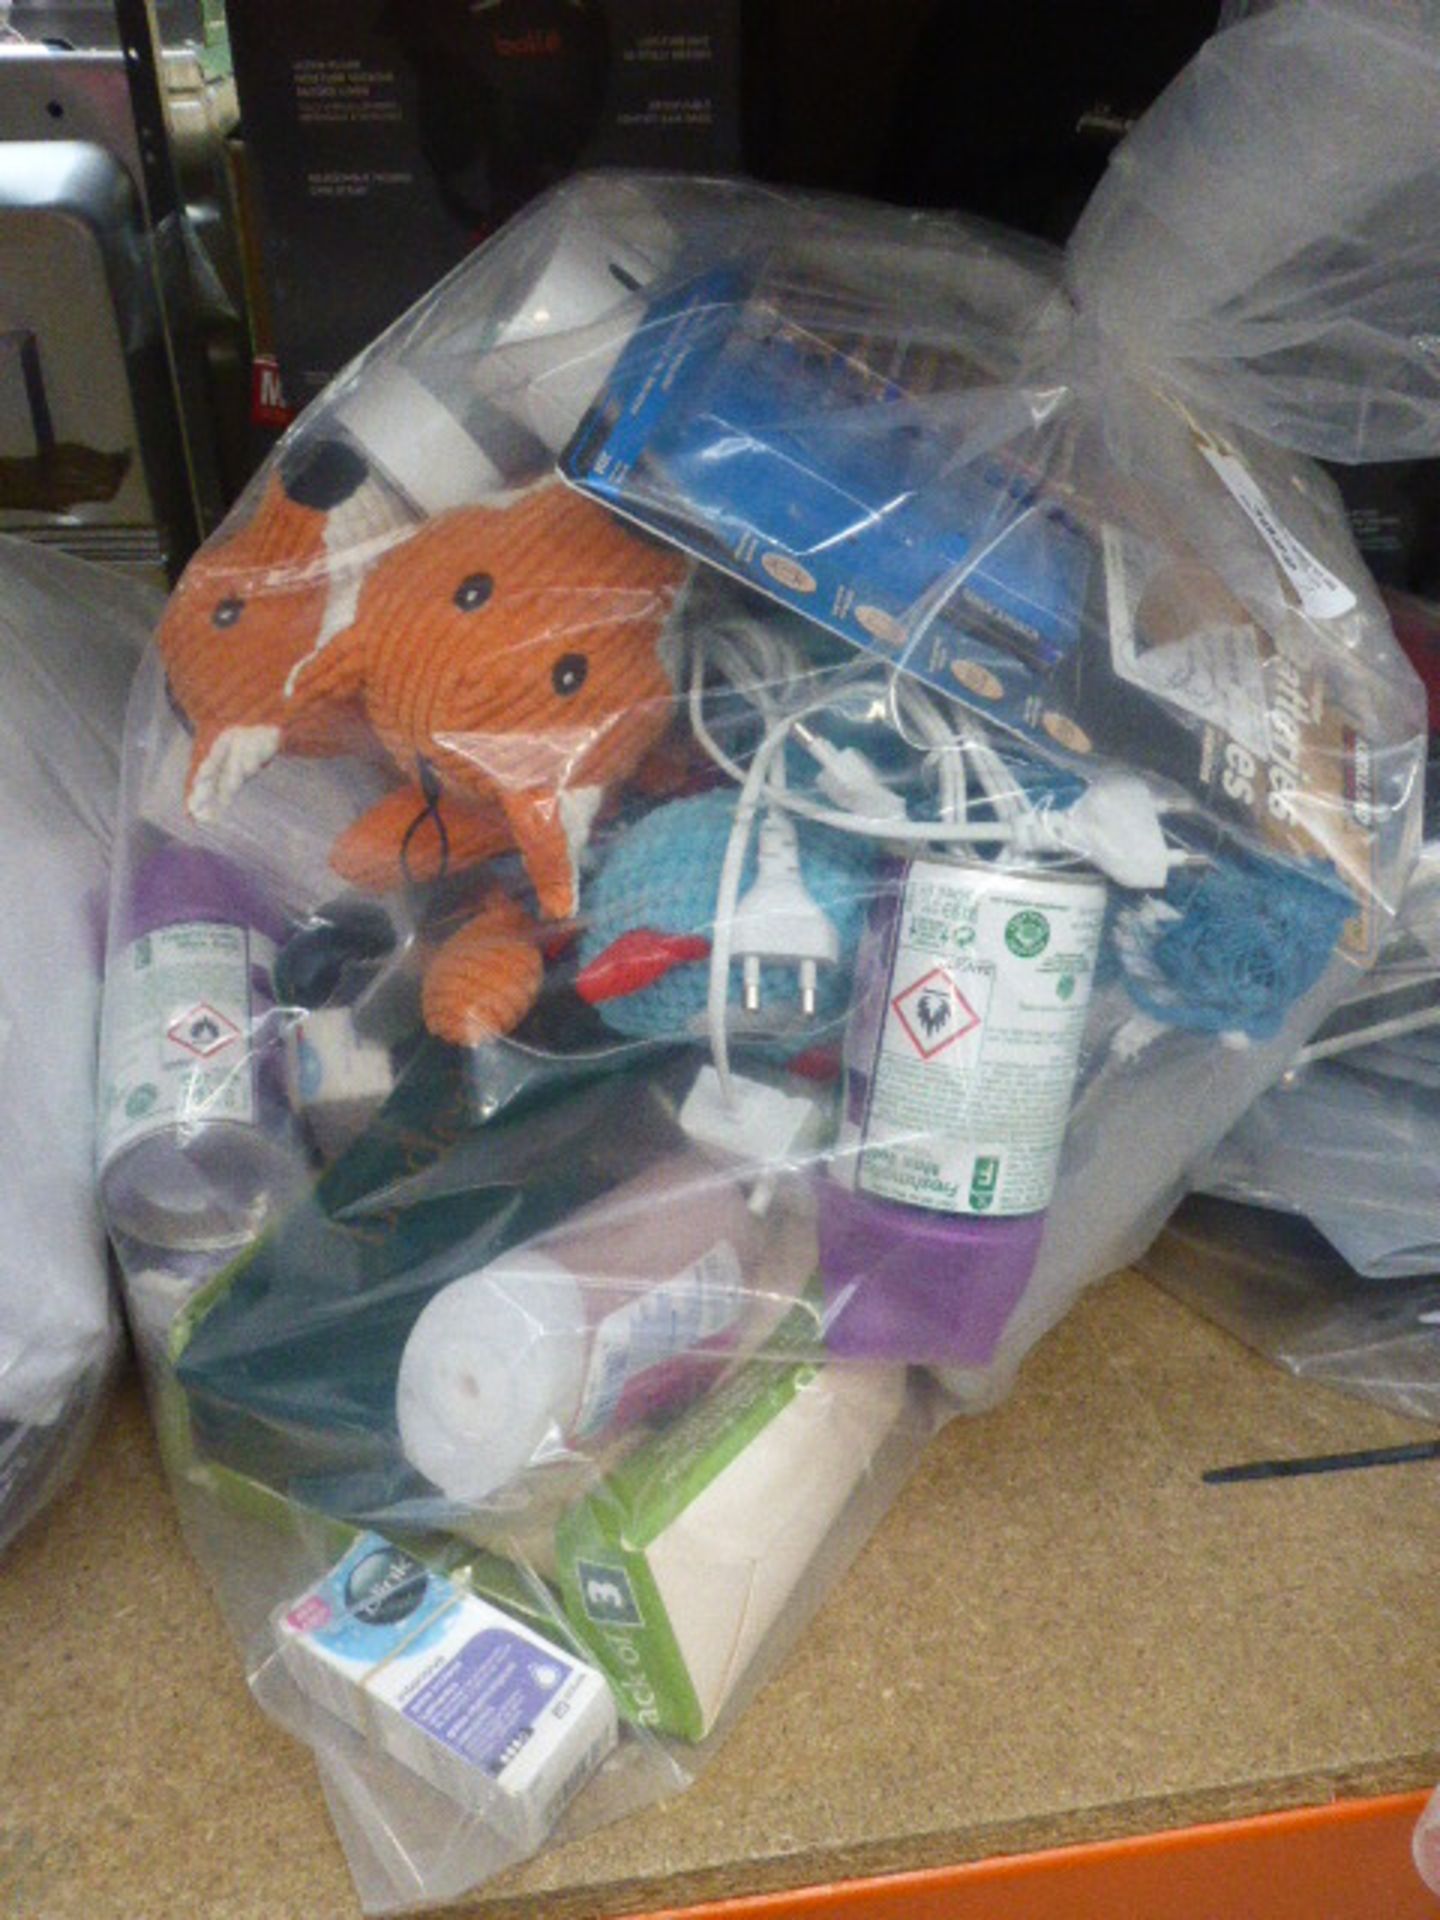 Bag containing some Kirkland batteries, Philips toothbrushes, dog toys, air fresheners, etc